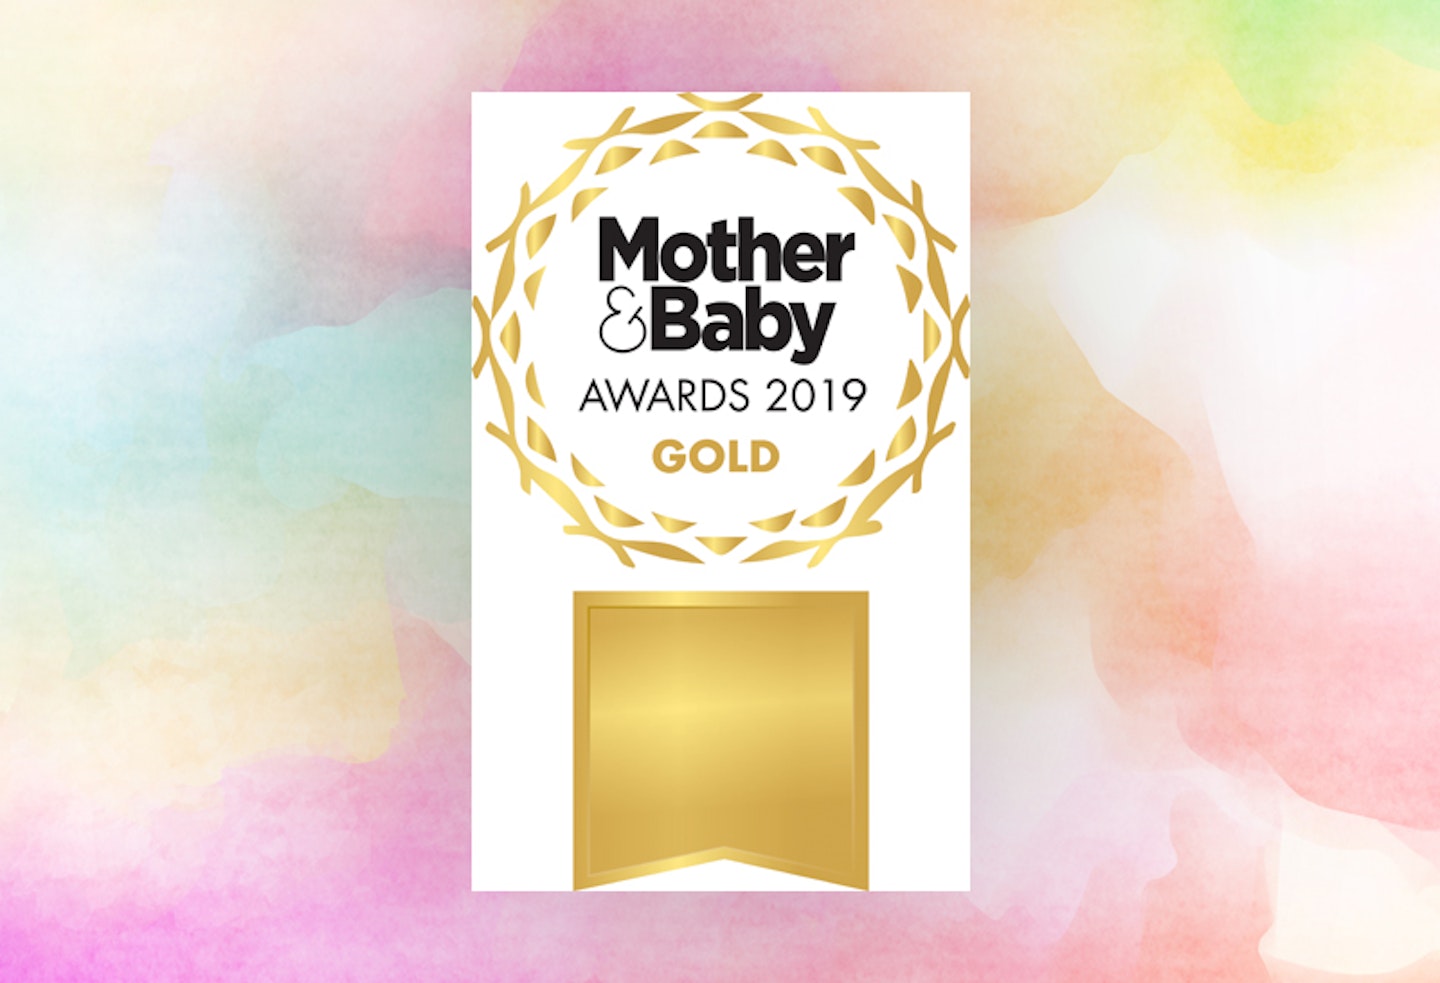 The Mother & Baby award winners 2019